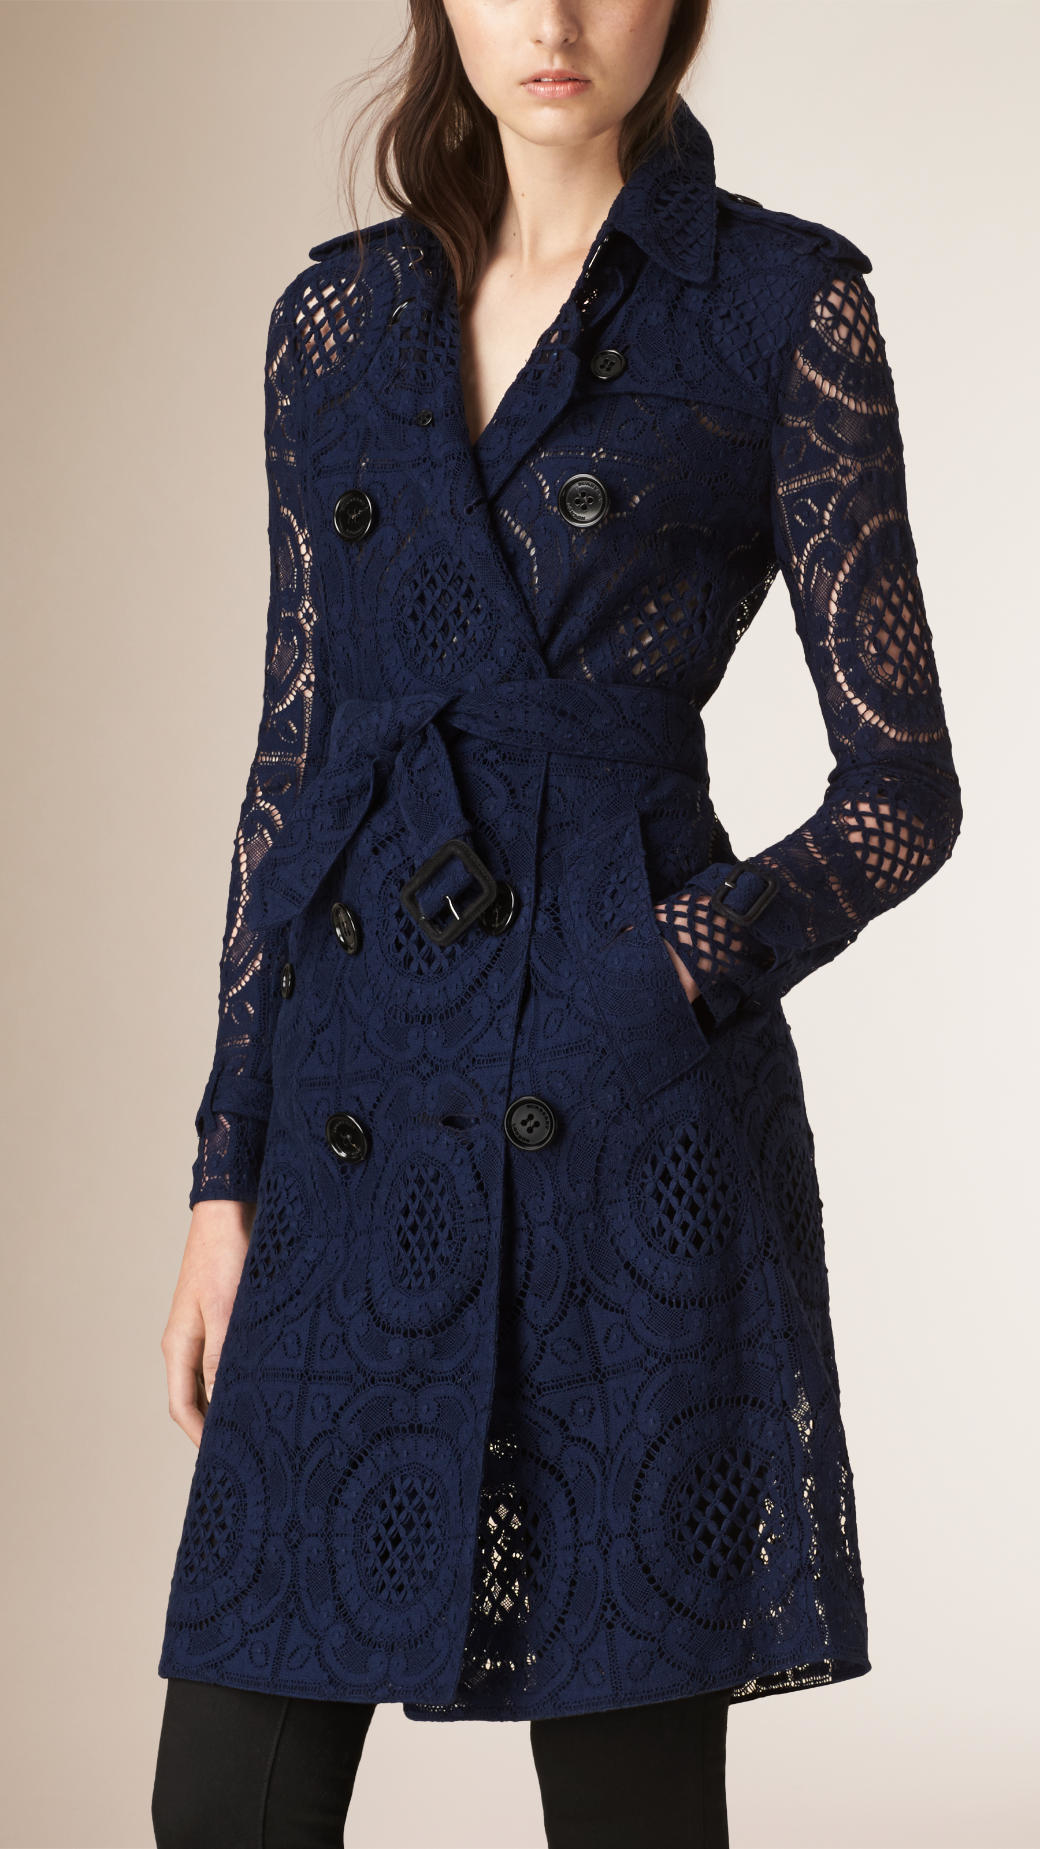 Burberry English Lace Trench Coat in Navy (Blue) - Lyst